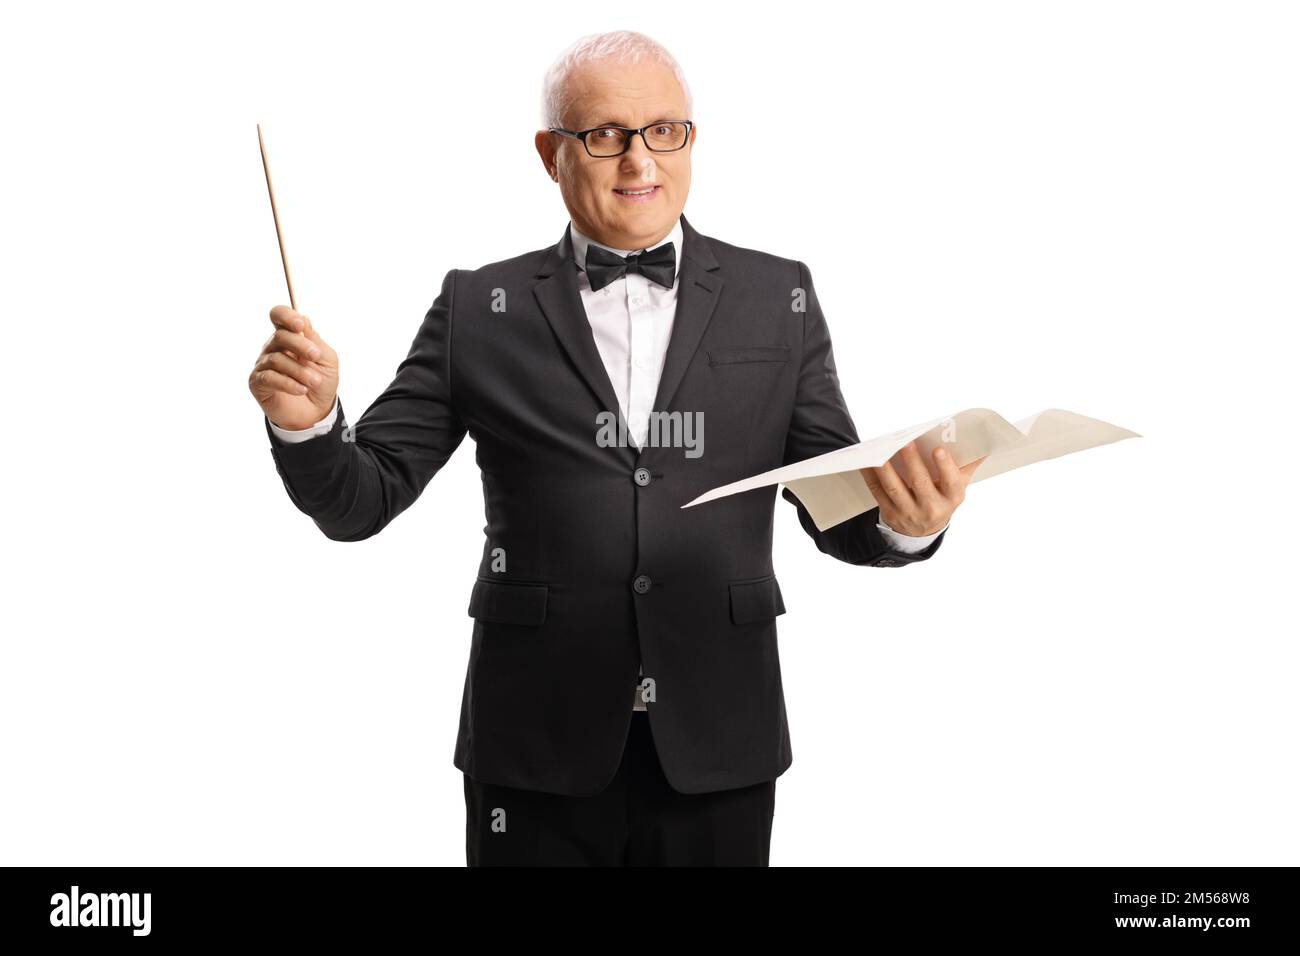 Mature male conductor directing a musical performance isolated on white background Stock Photo